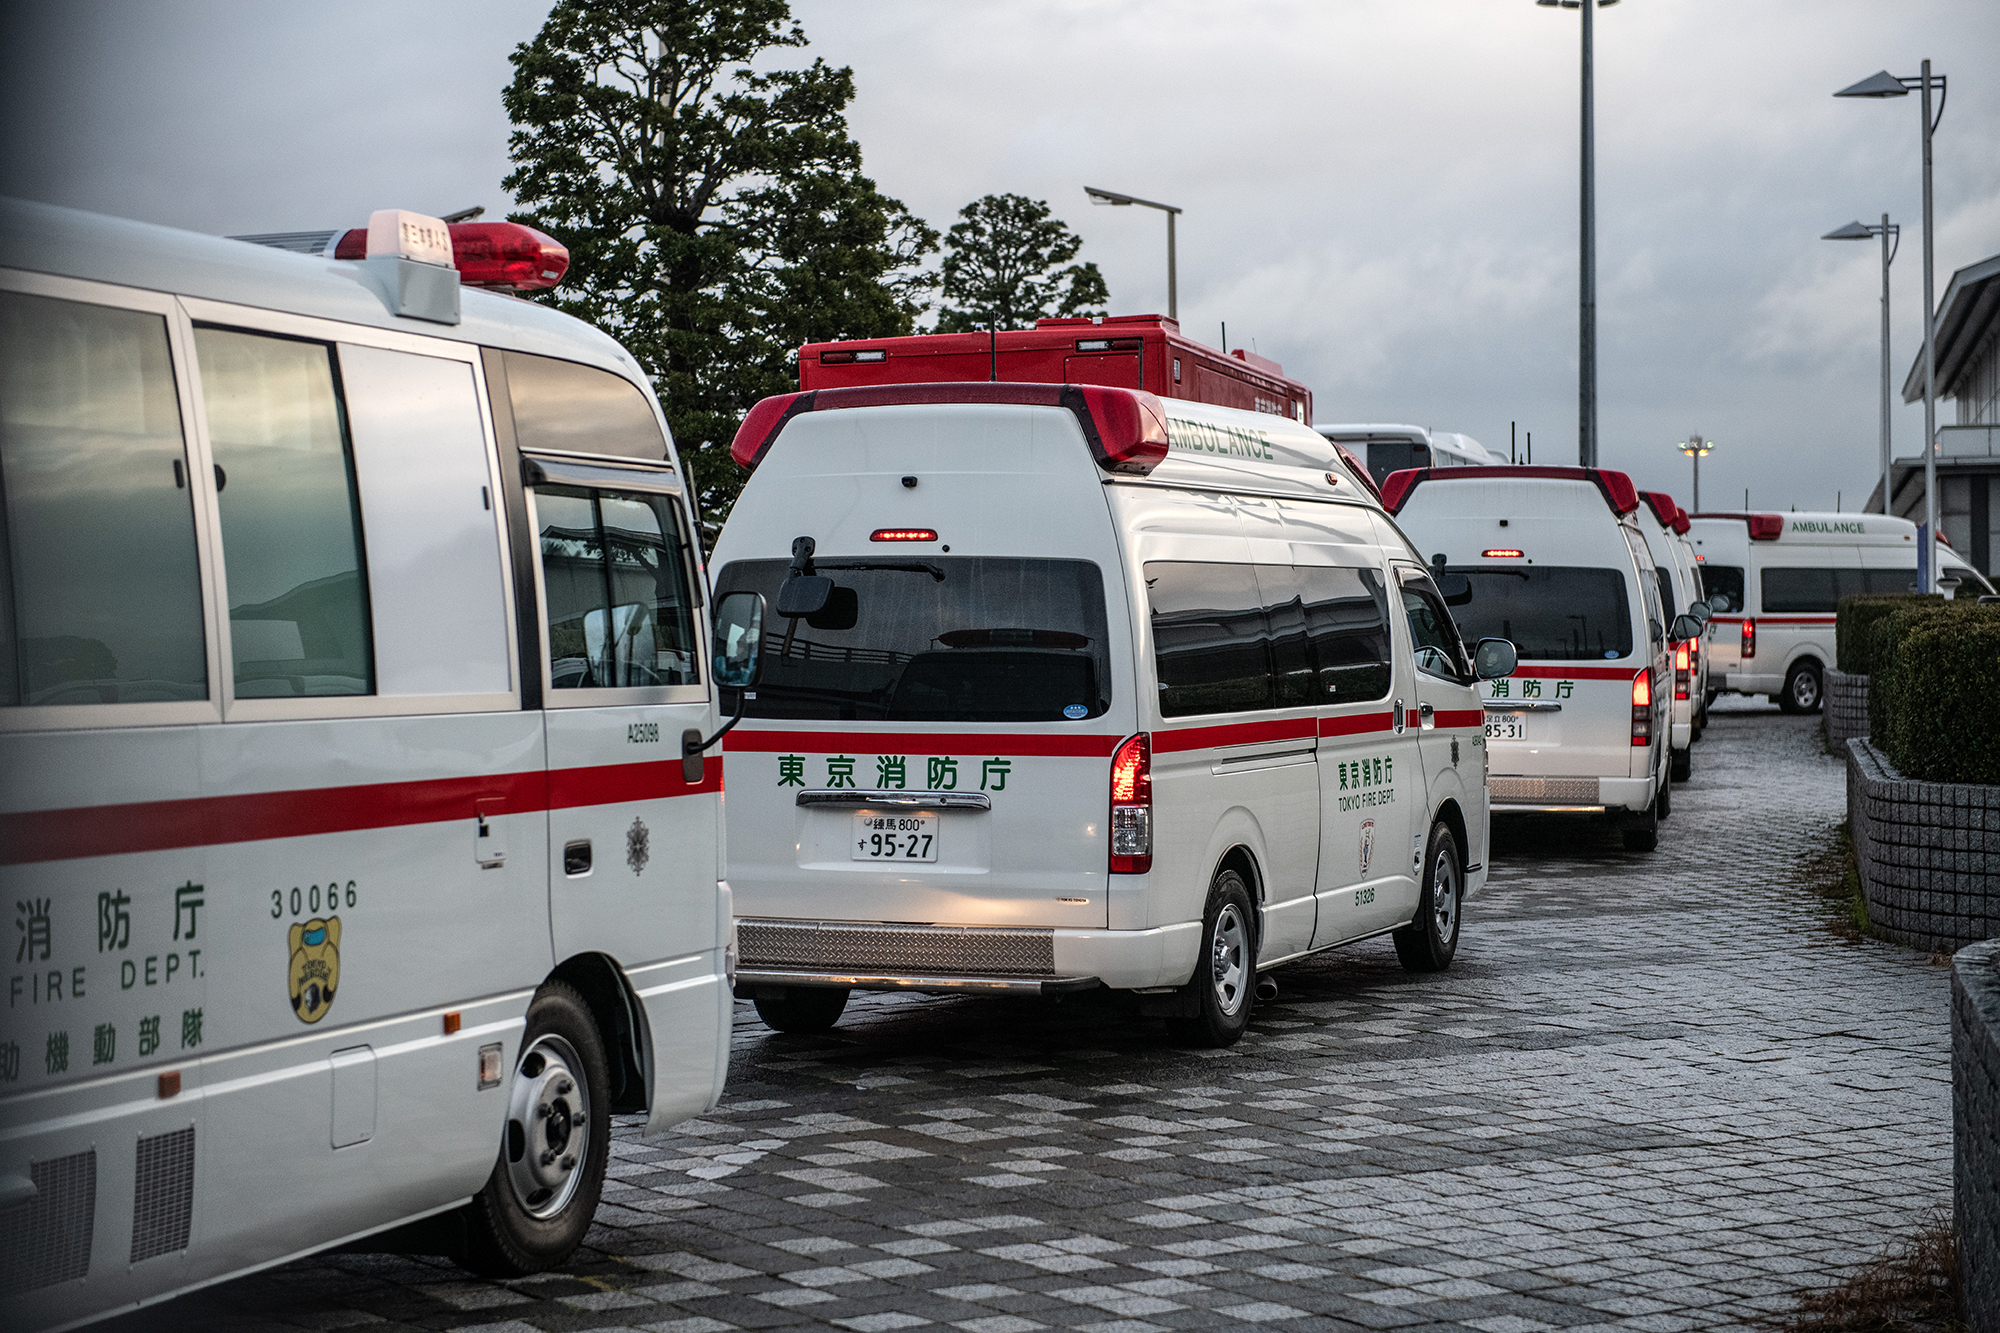 Ambulances line up ahead of the arrival of an airplane carrying Japanese citizens repatriated from Wuhan amidst the coronavirus outbreak.